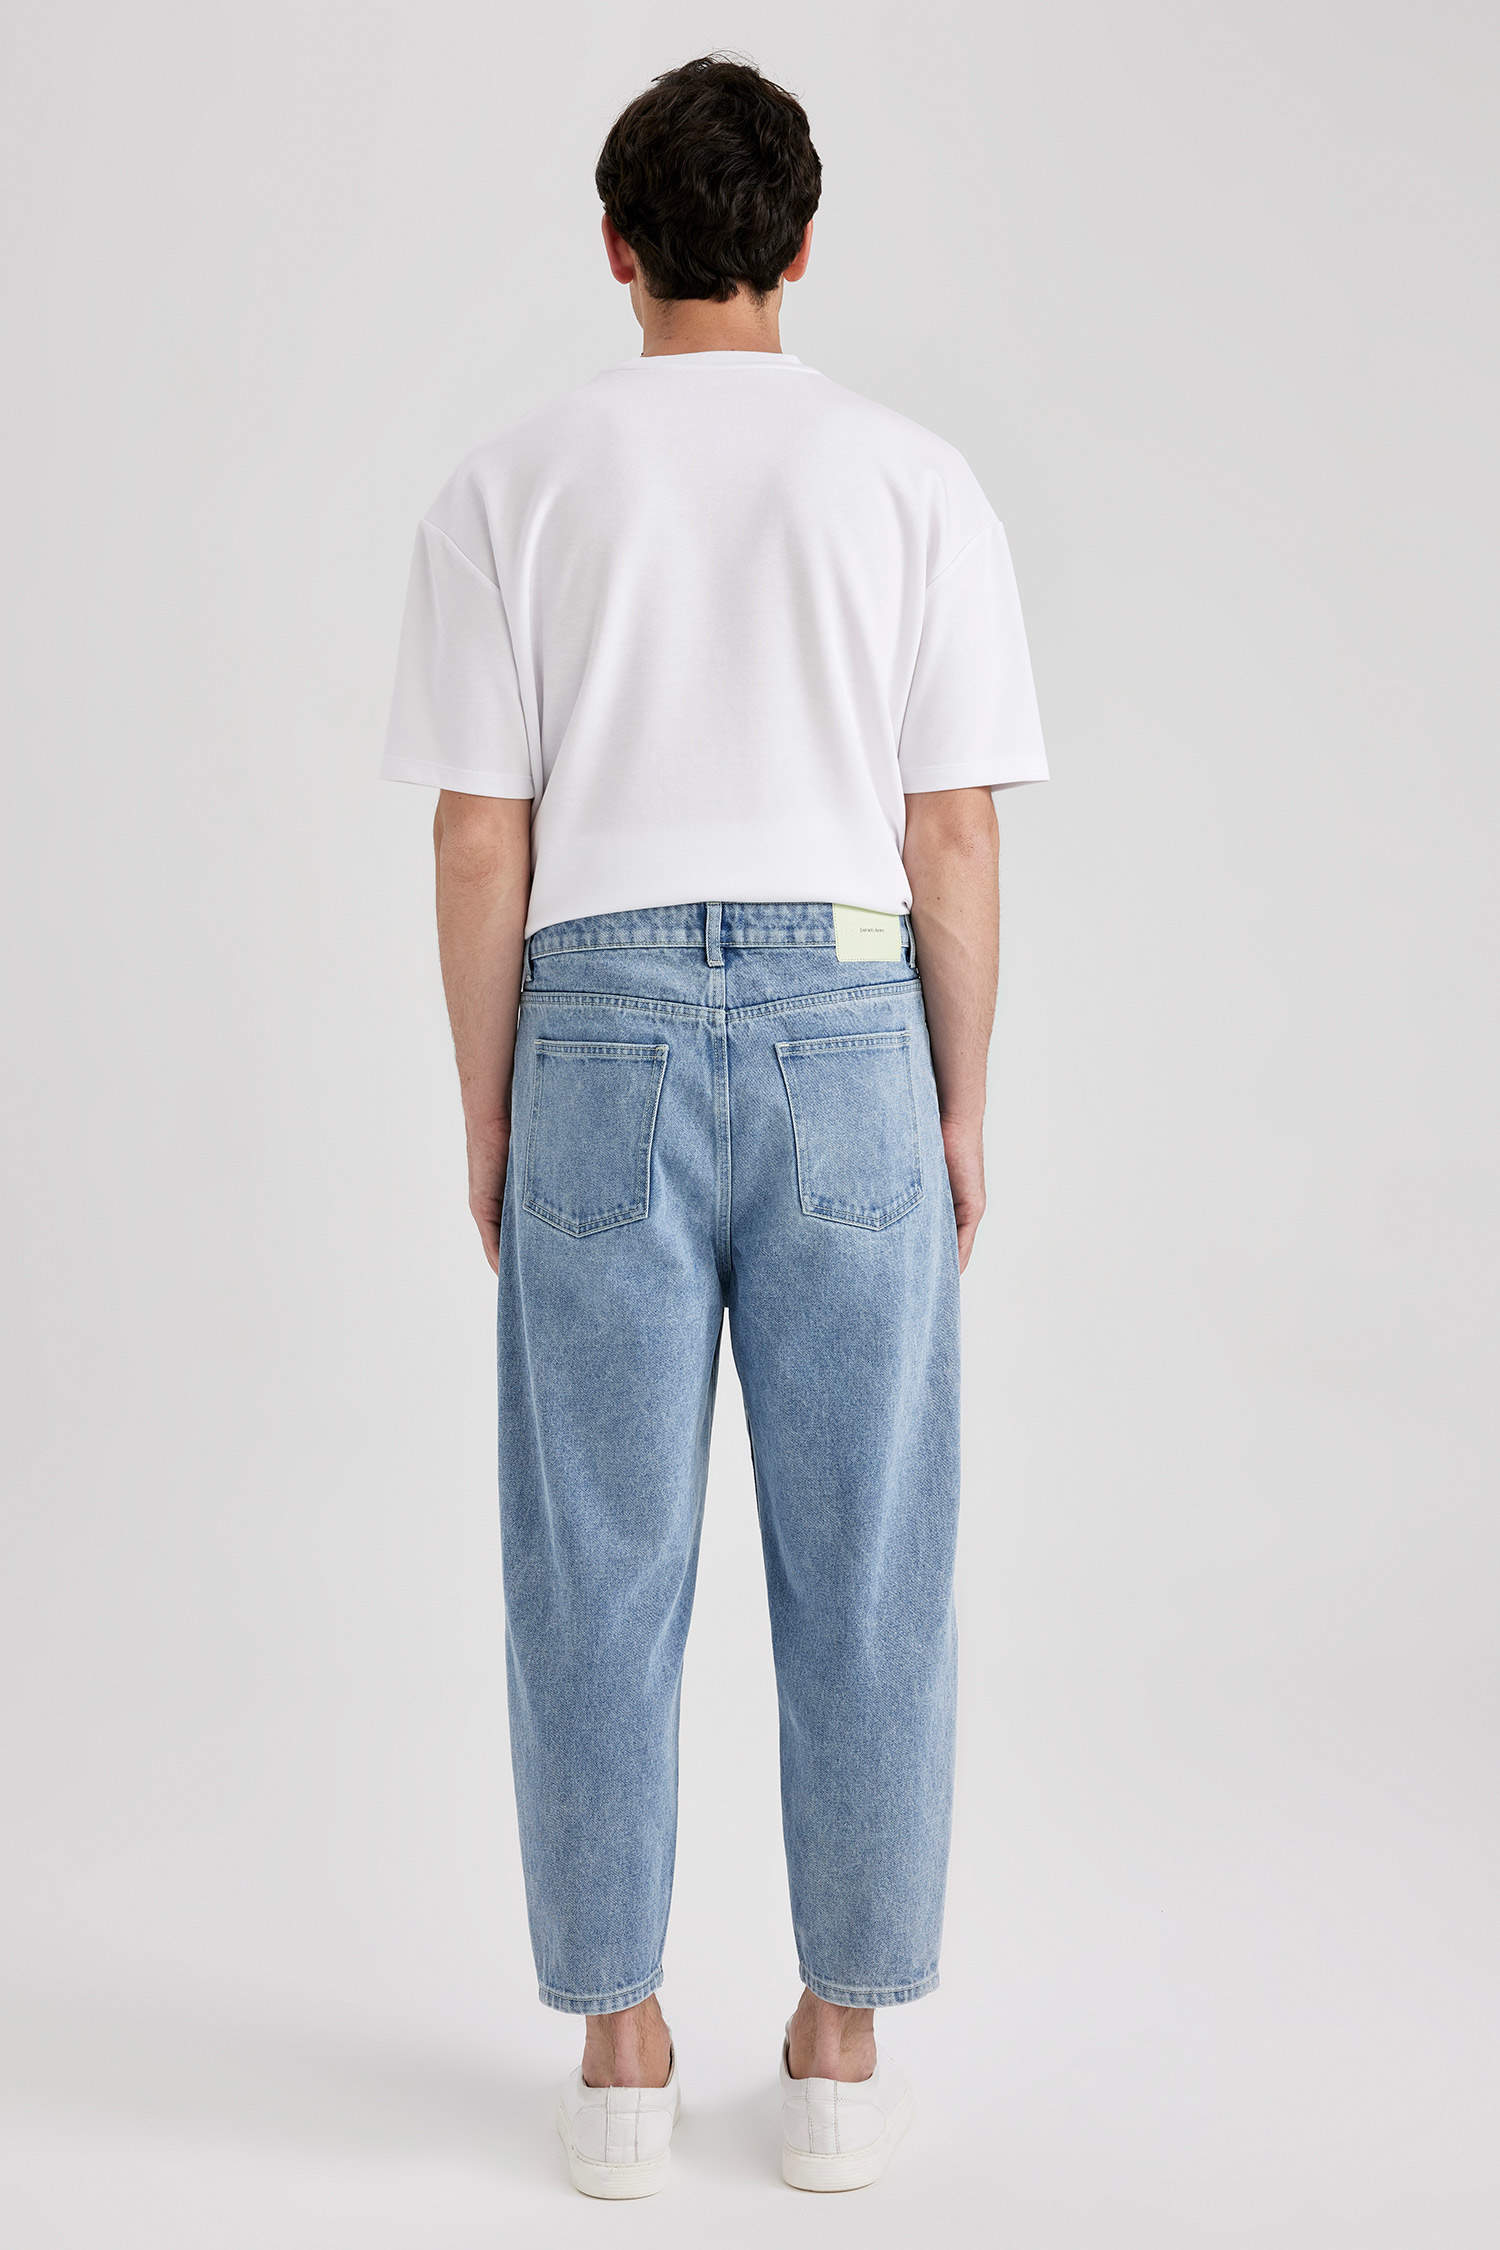 Issey Miyake fullypleated ballooncut Trousers  Farfetch